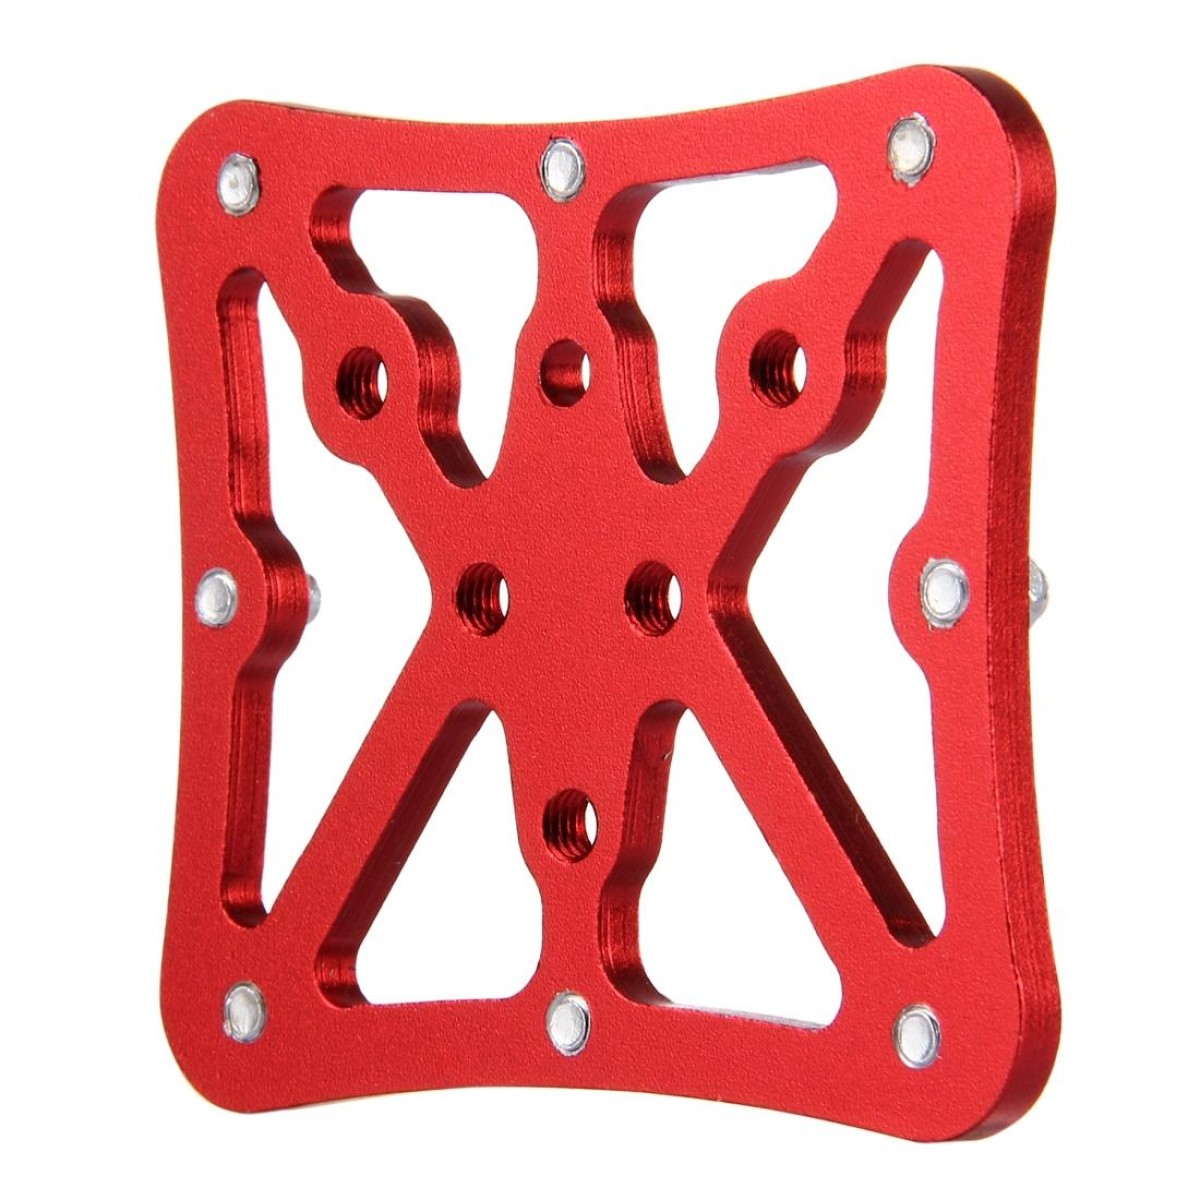 Single Road Bike Universal Clipless to Pedals Platform Adapter for Bike MTB, Size: Small(Red)